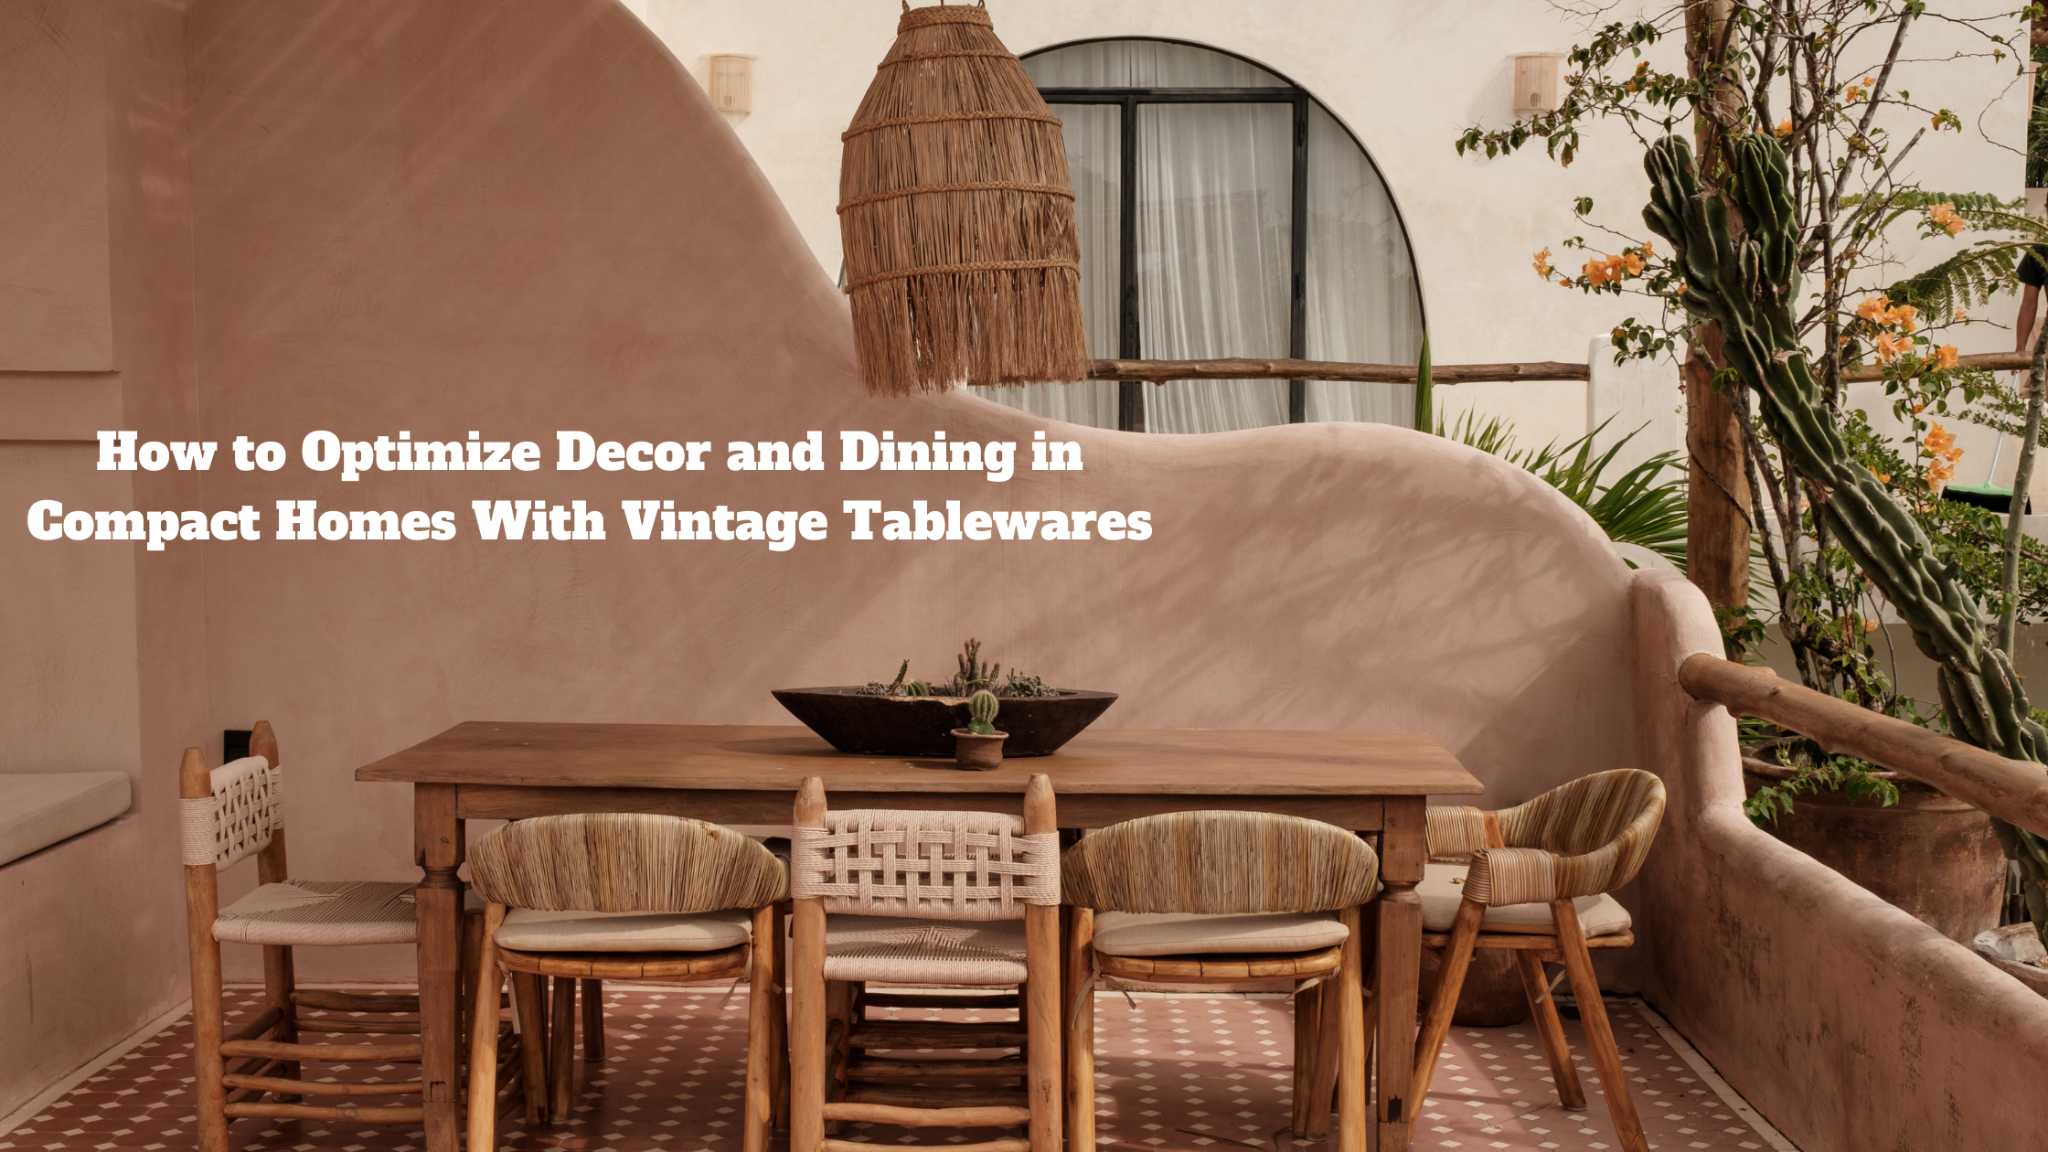 How to Optimize Decor and Dining in Compact Homes With Vintage Tablewares